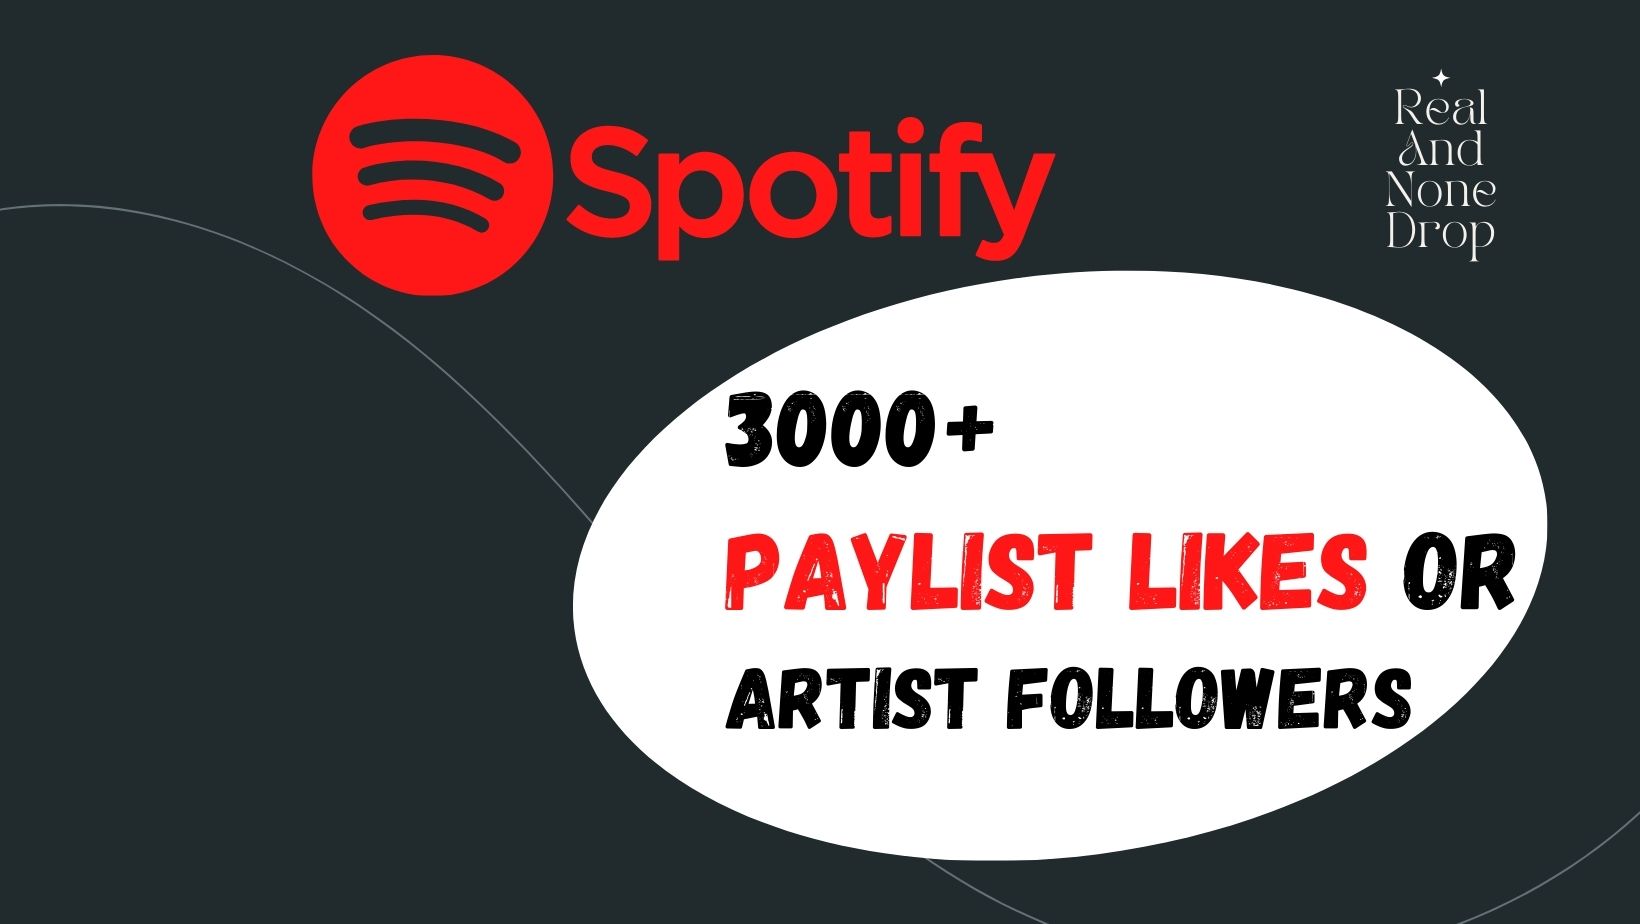 You will get 3000+ Spotify Playlist or Artist Followers